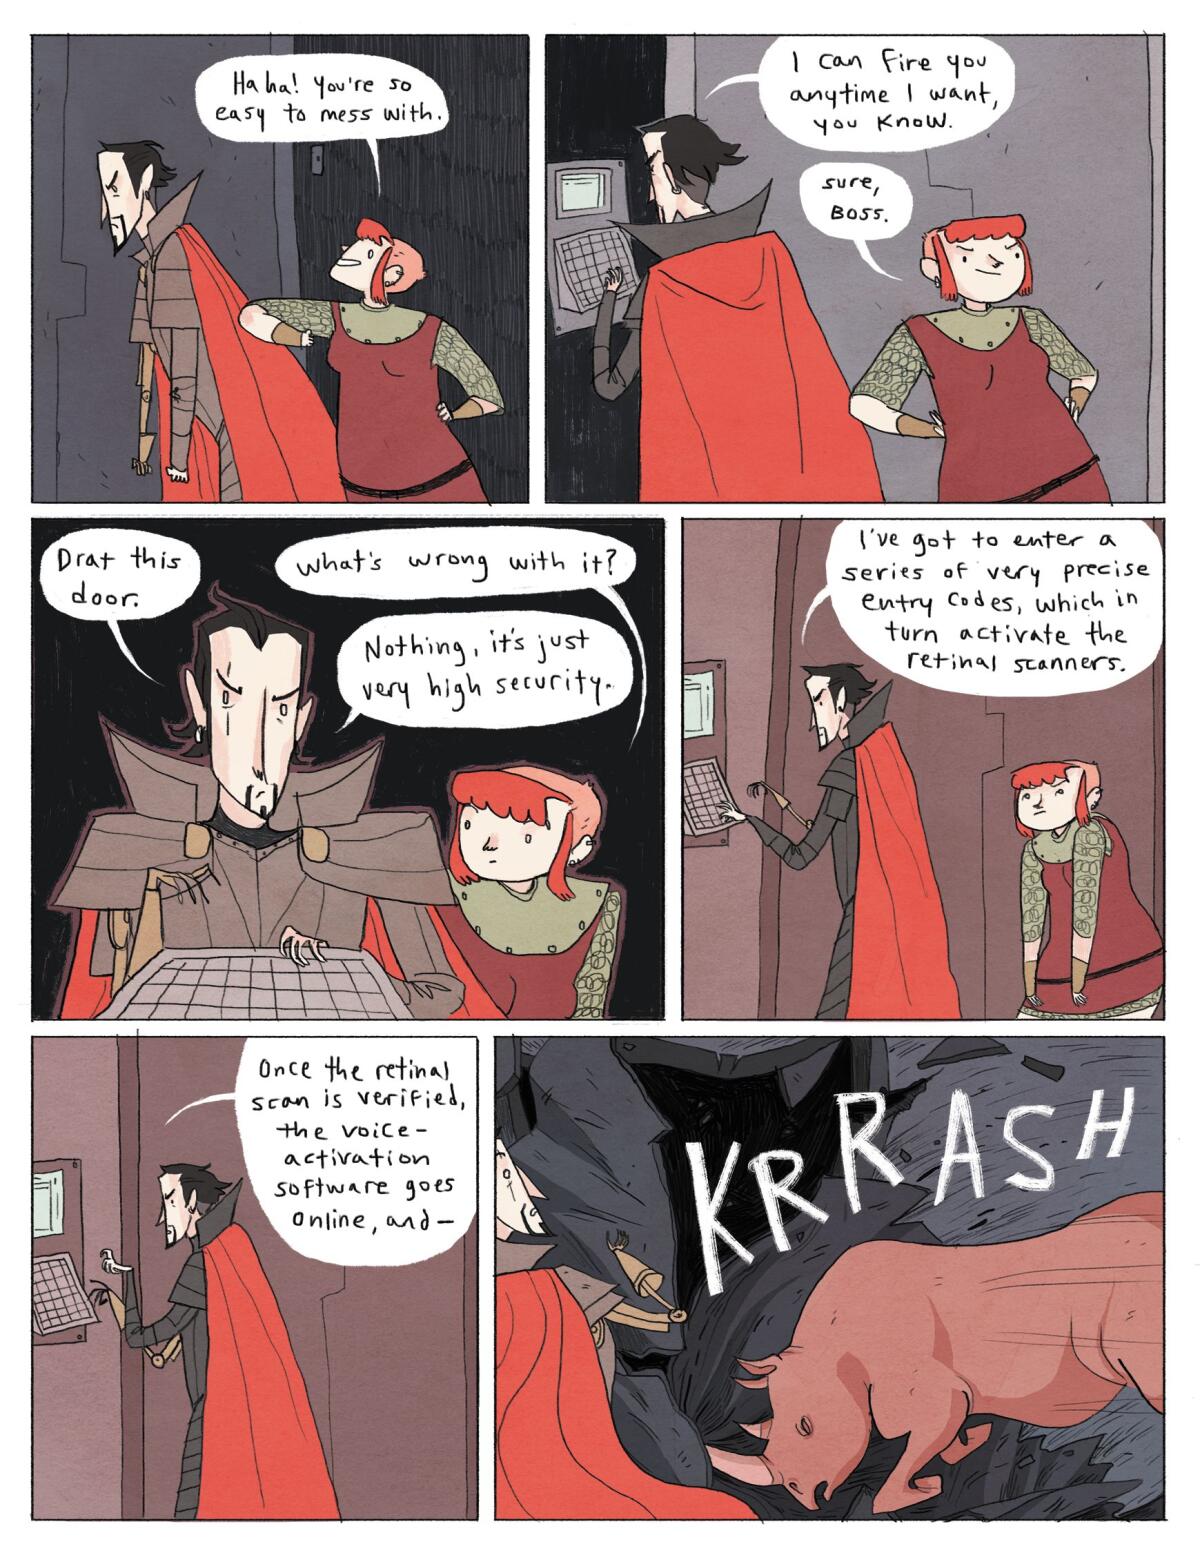 A comic page with various panels and graphics of Nimona and a man